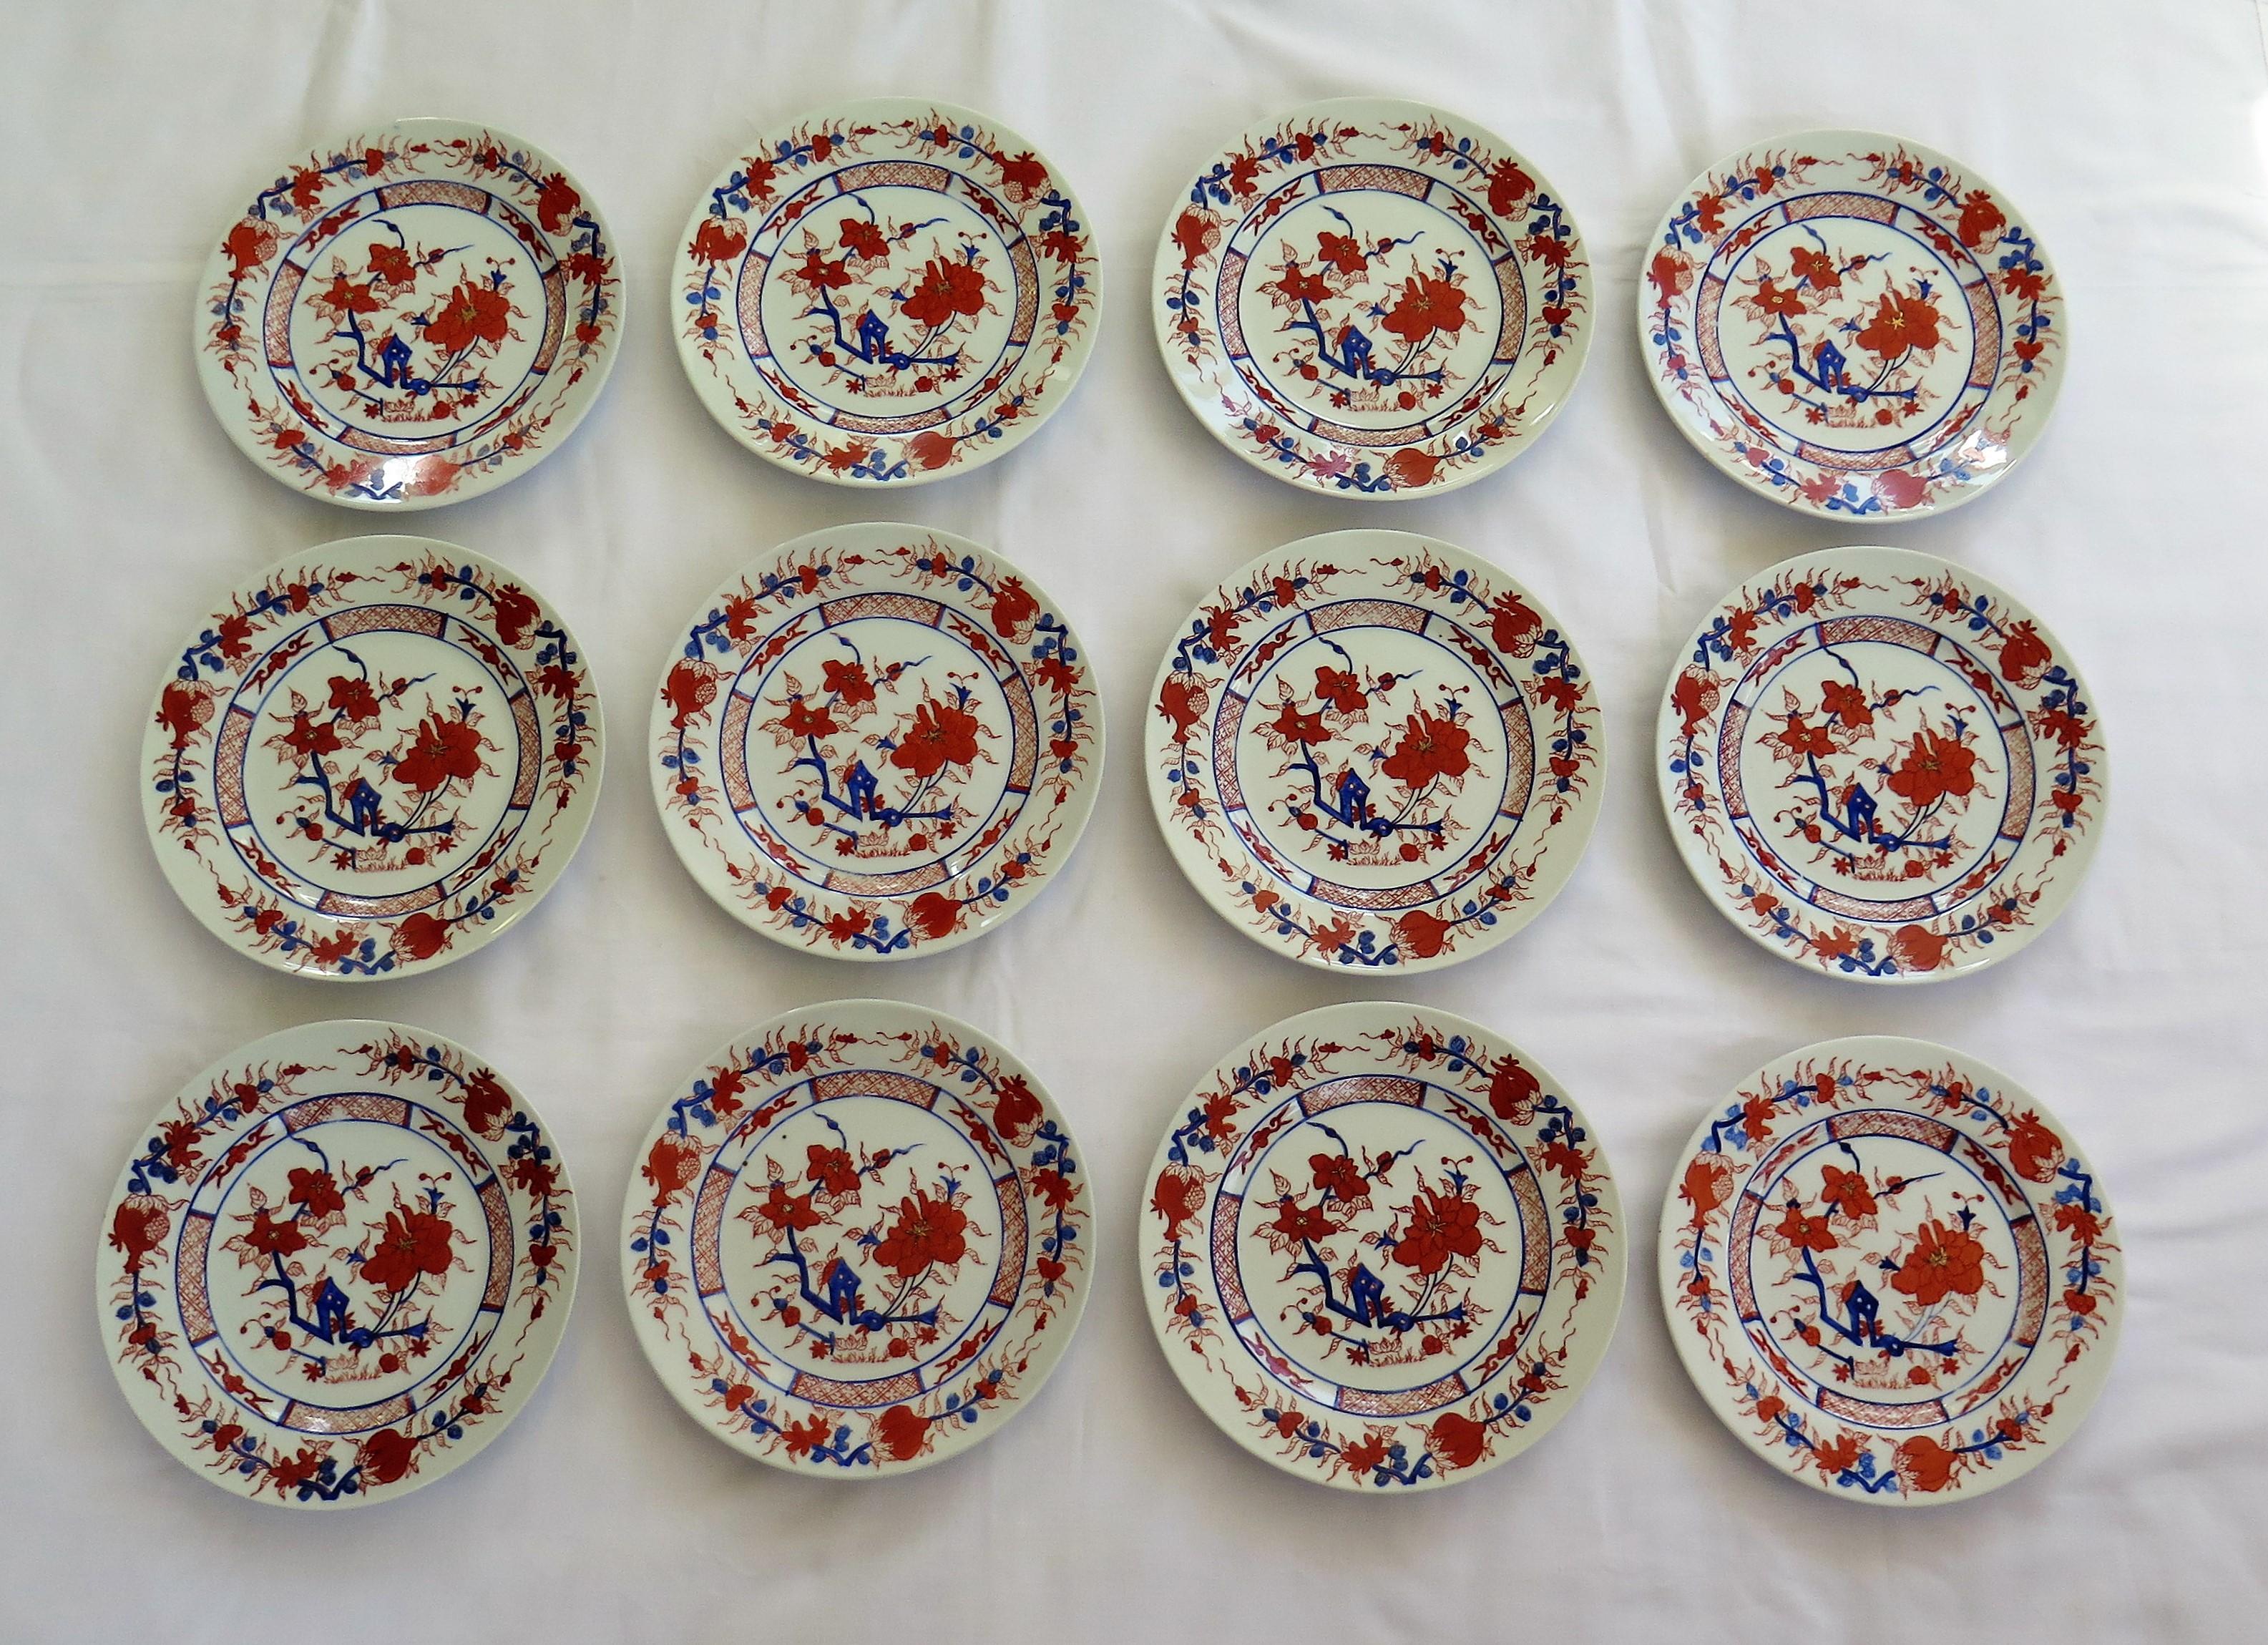 These are a very good set of 12 Chinese Export porcelain side plates.

Each plate is hand decorated in a bold floral imari pattern using brick red and cobalt blue enamels in various shades. The plates have various borders including an alternating